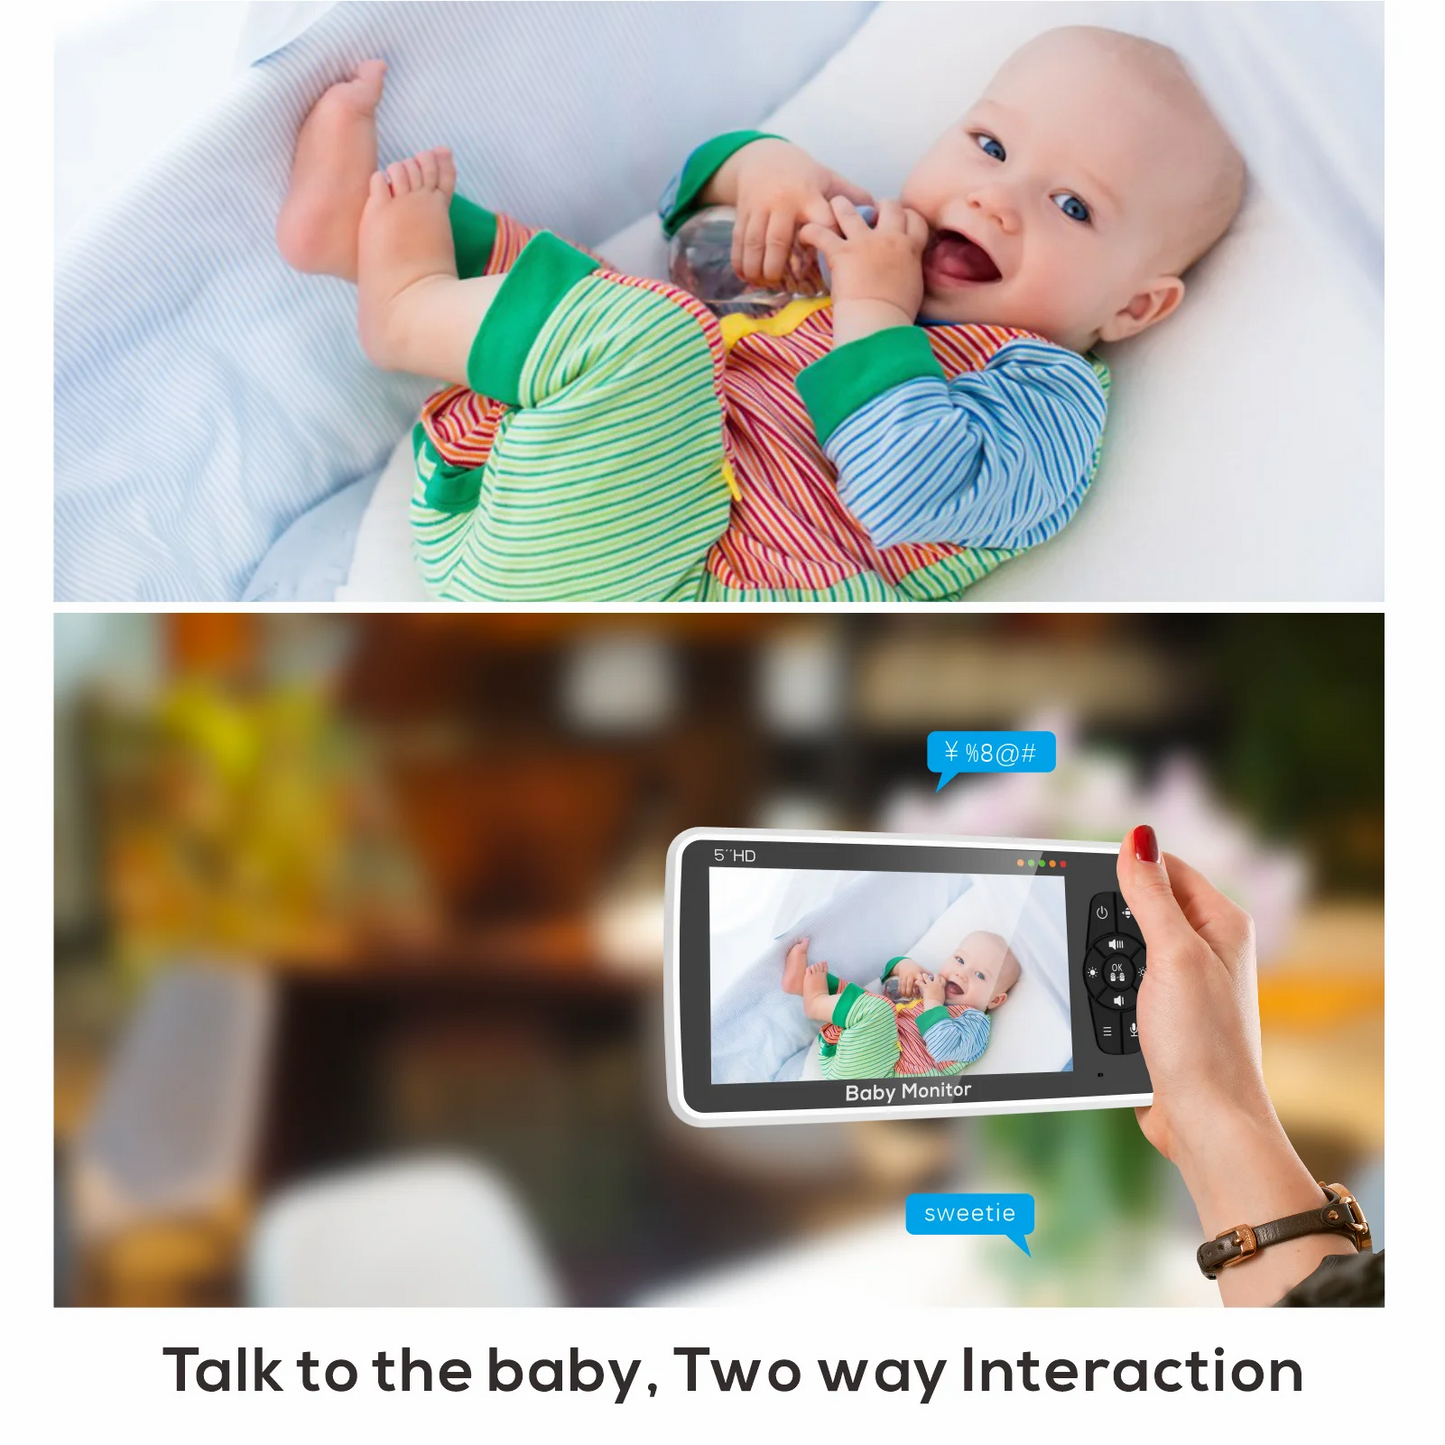 The New 5 inch Video Baby Monitor offers crystal clear camera and audio